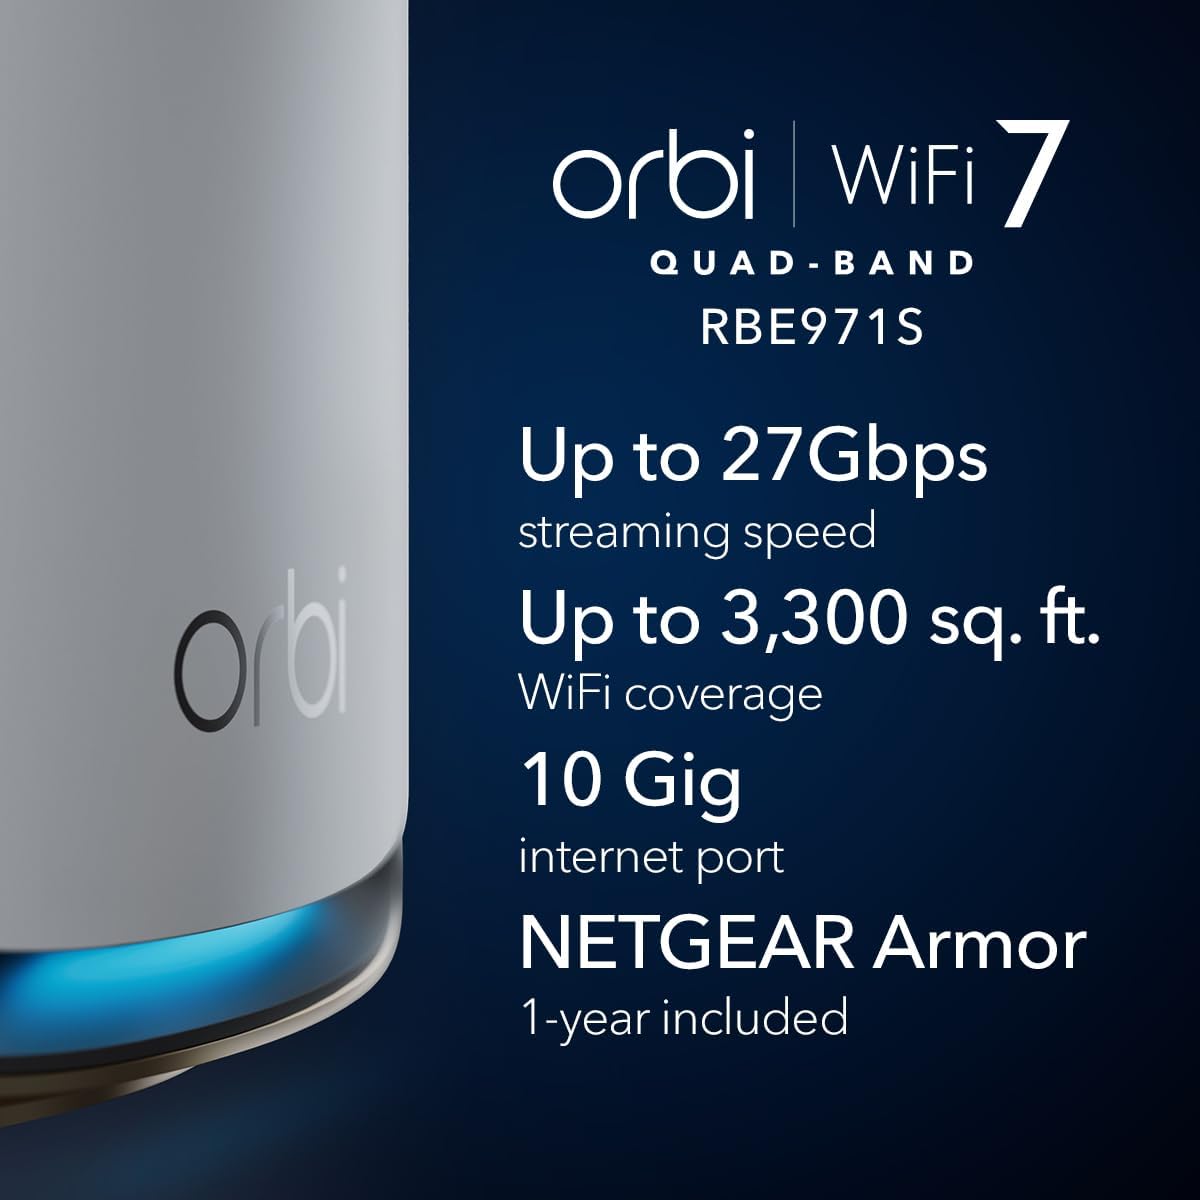 ‎NETGEAR Orbi 970 Series Quad-Band WiFi 7 Mesh Router ( RBE971S-100NAS ) launched in the US